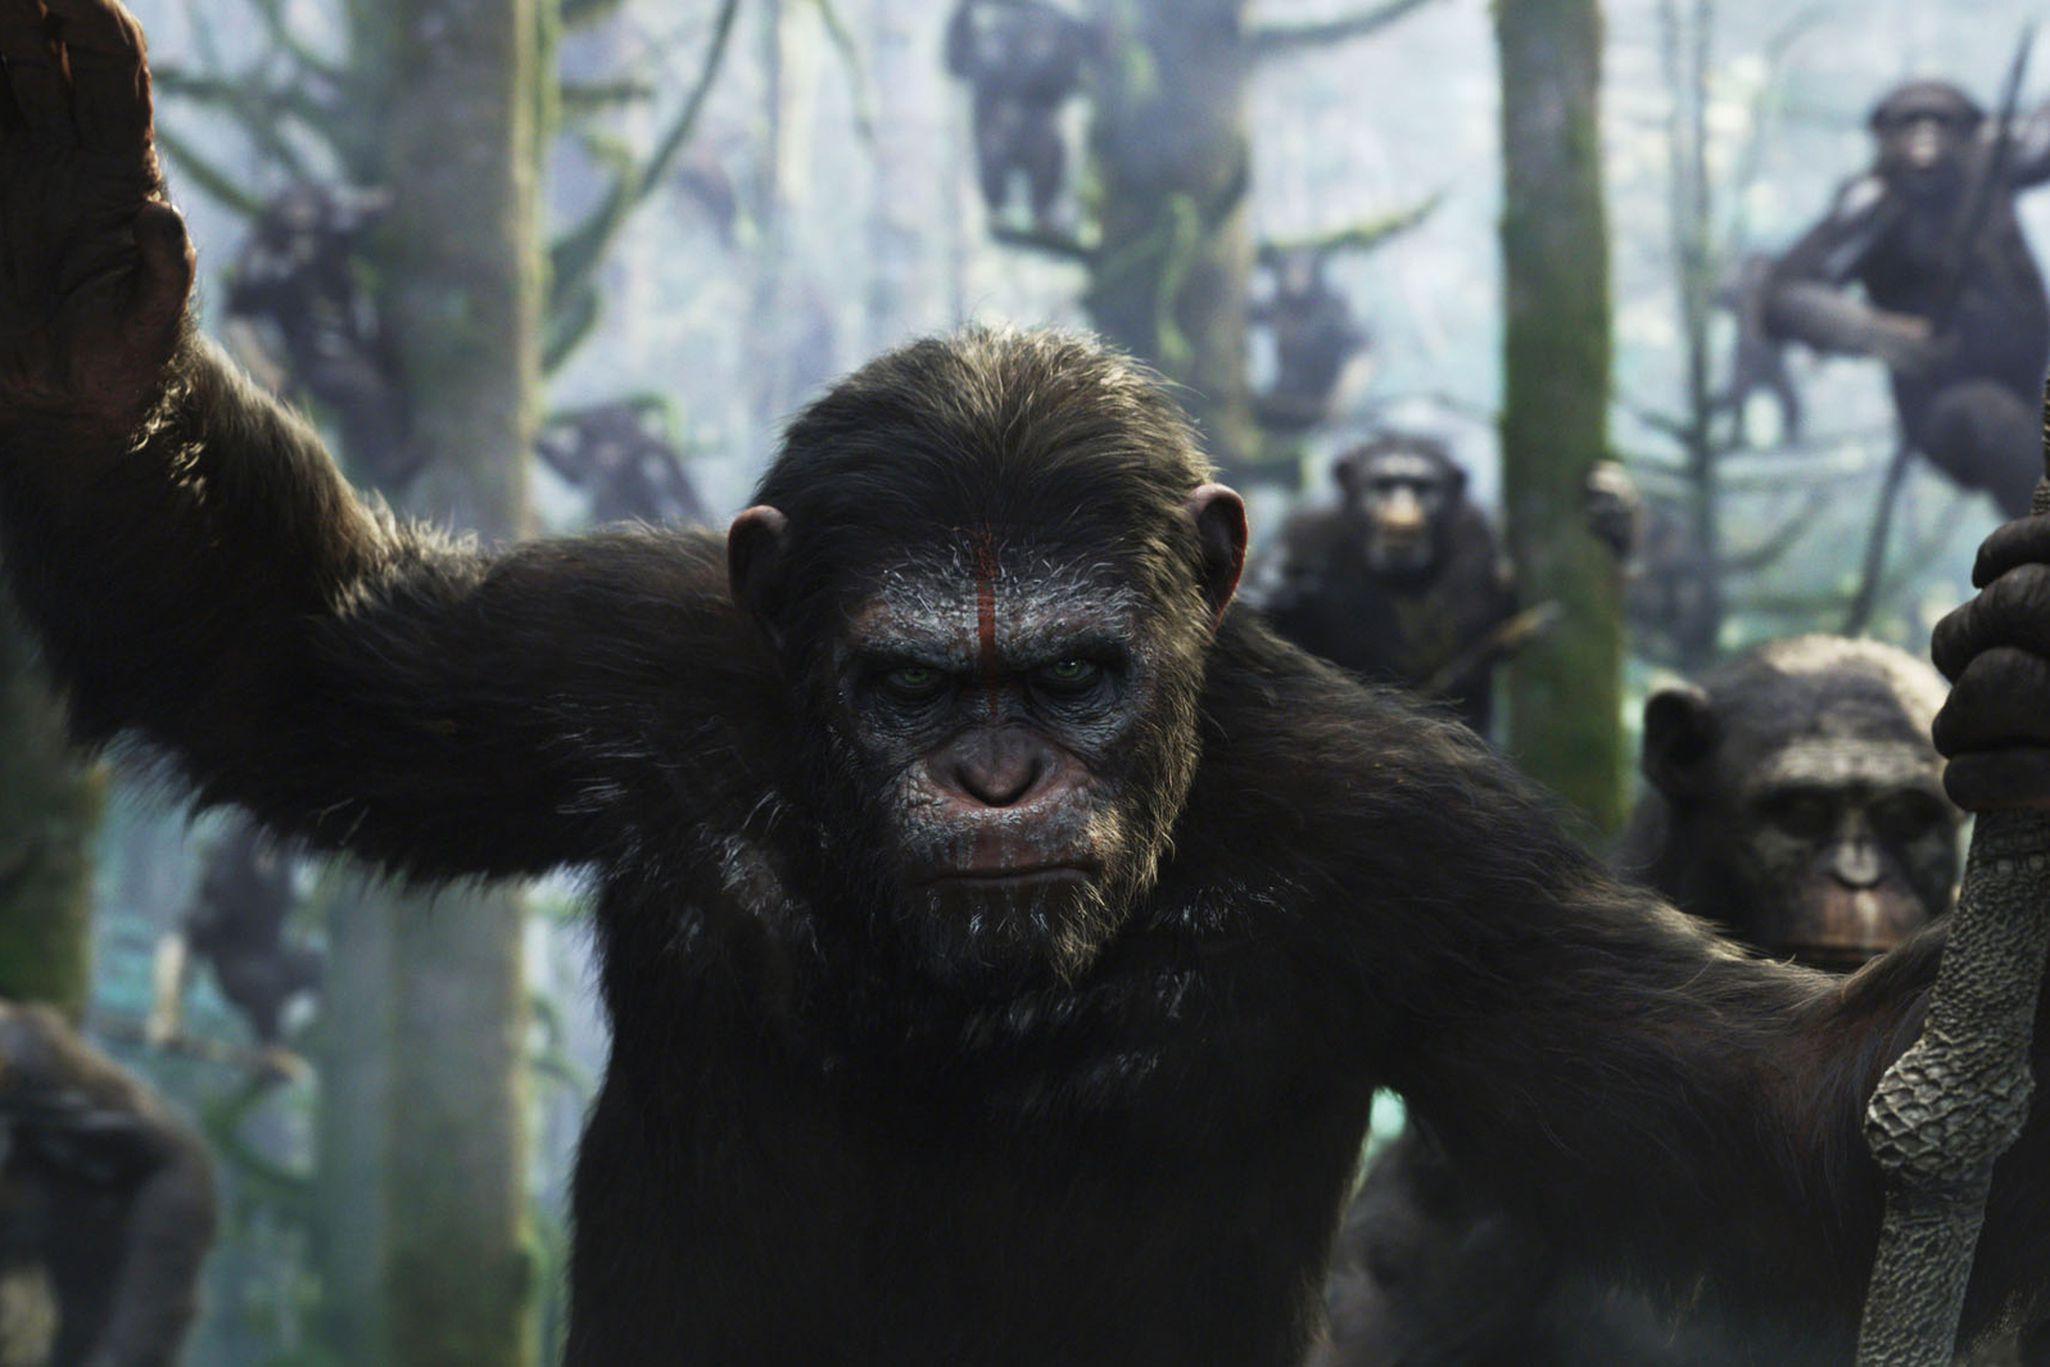 Dawn of the Planet of the Apes' review: damn dirty humans